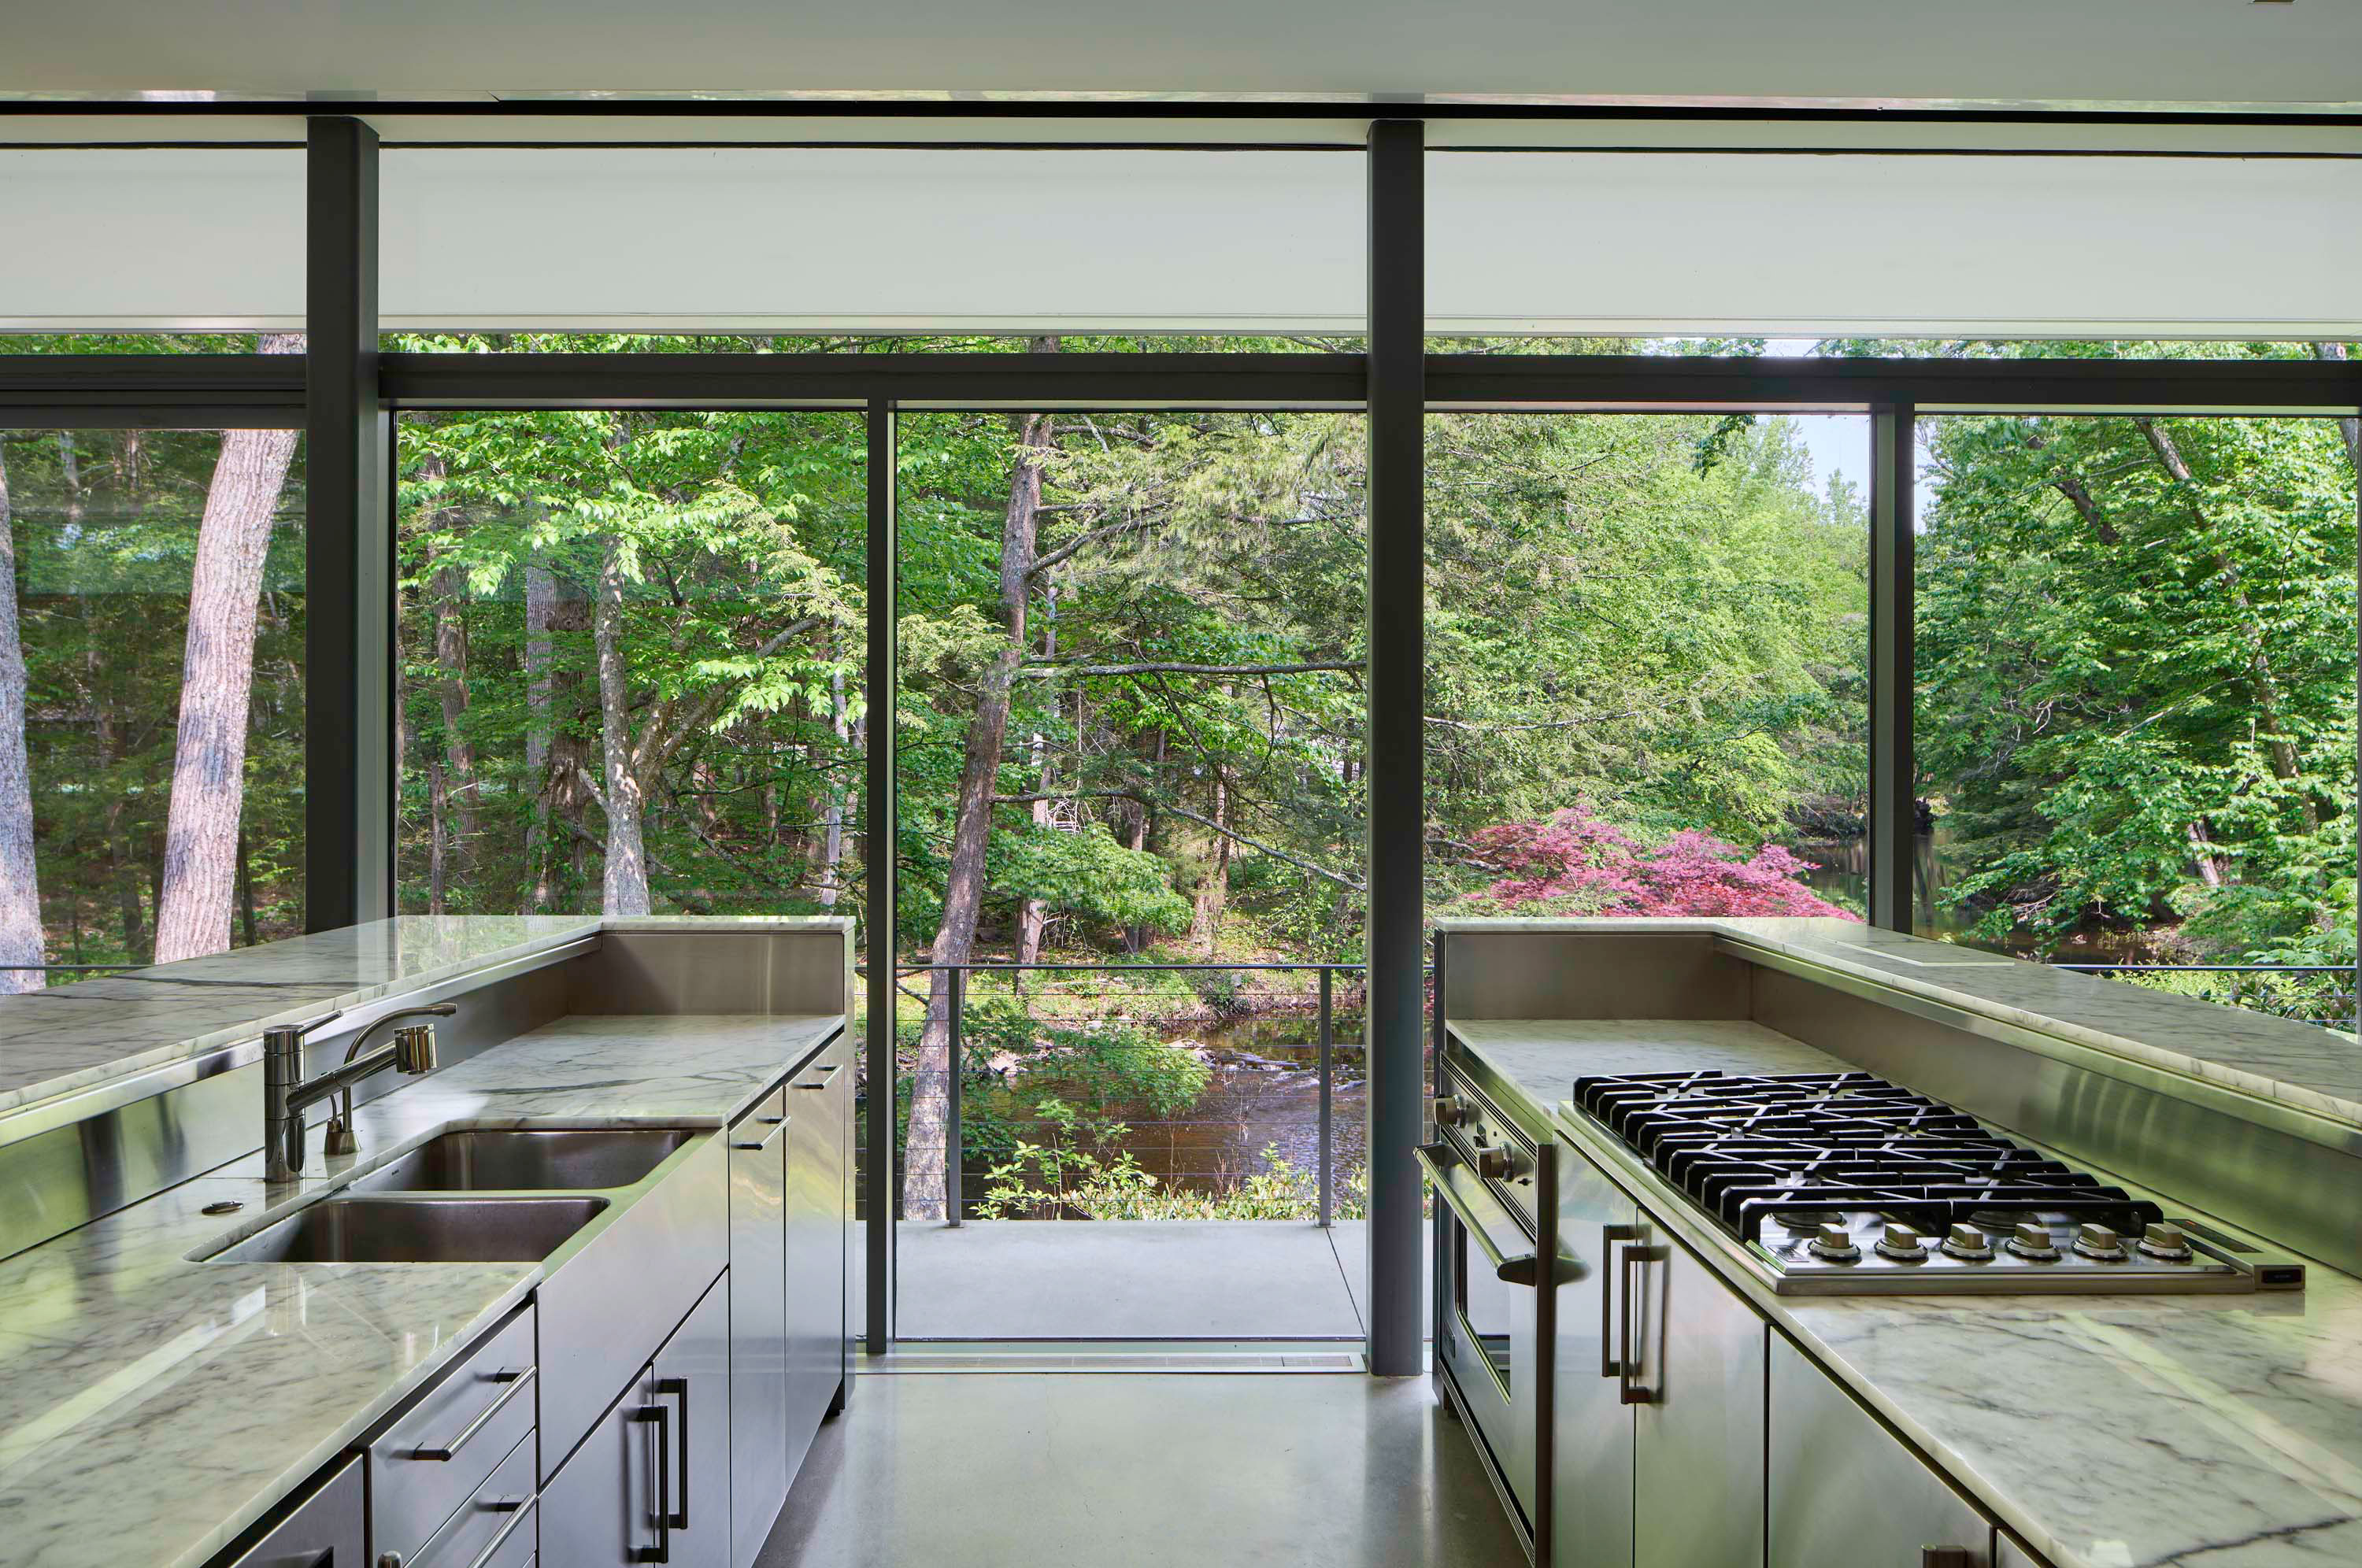 Interior photo of Weston Residence by Specht Novak Architects. Shot by Jasper Lazor, featuring a fully equipped kitchen and glass walls immersing the home on the nature around it.